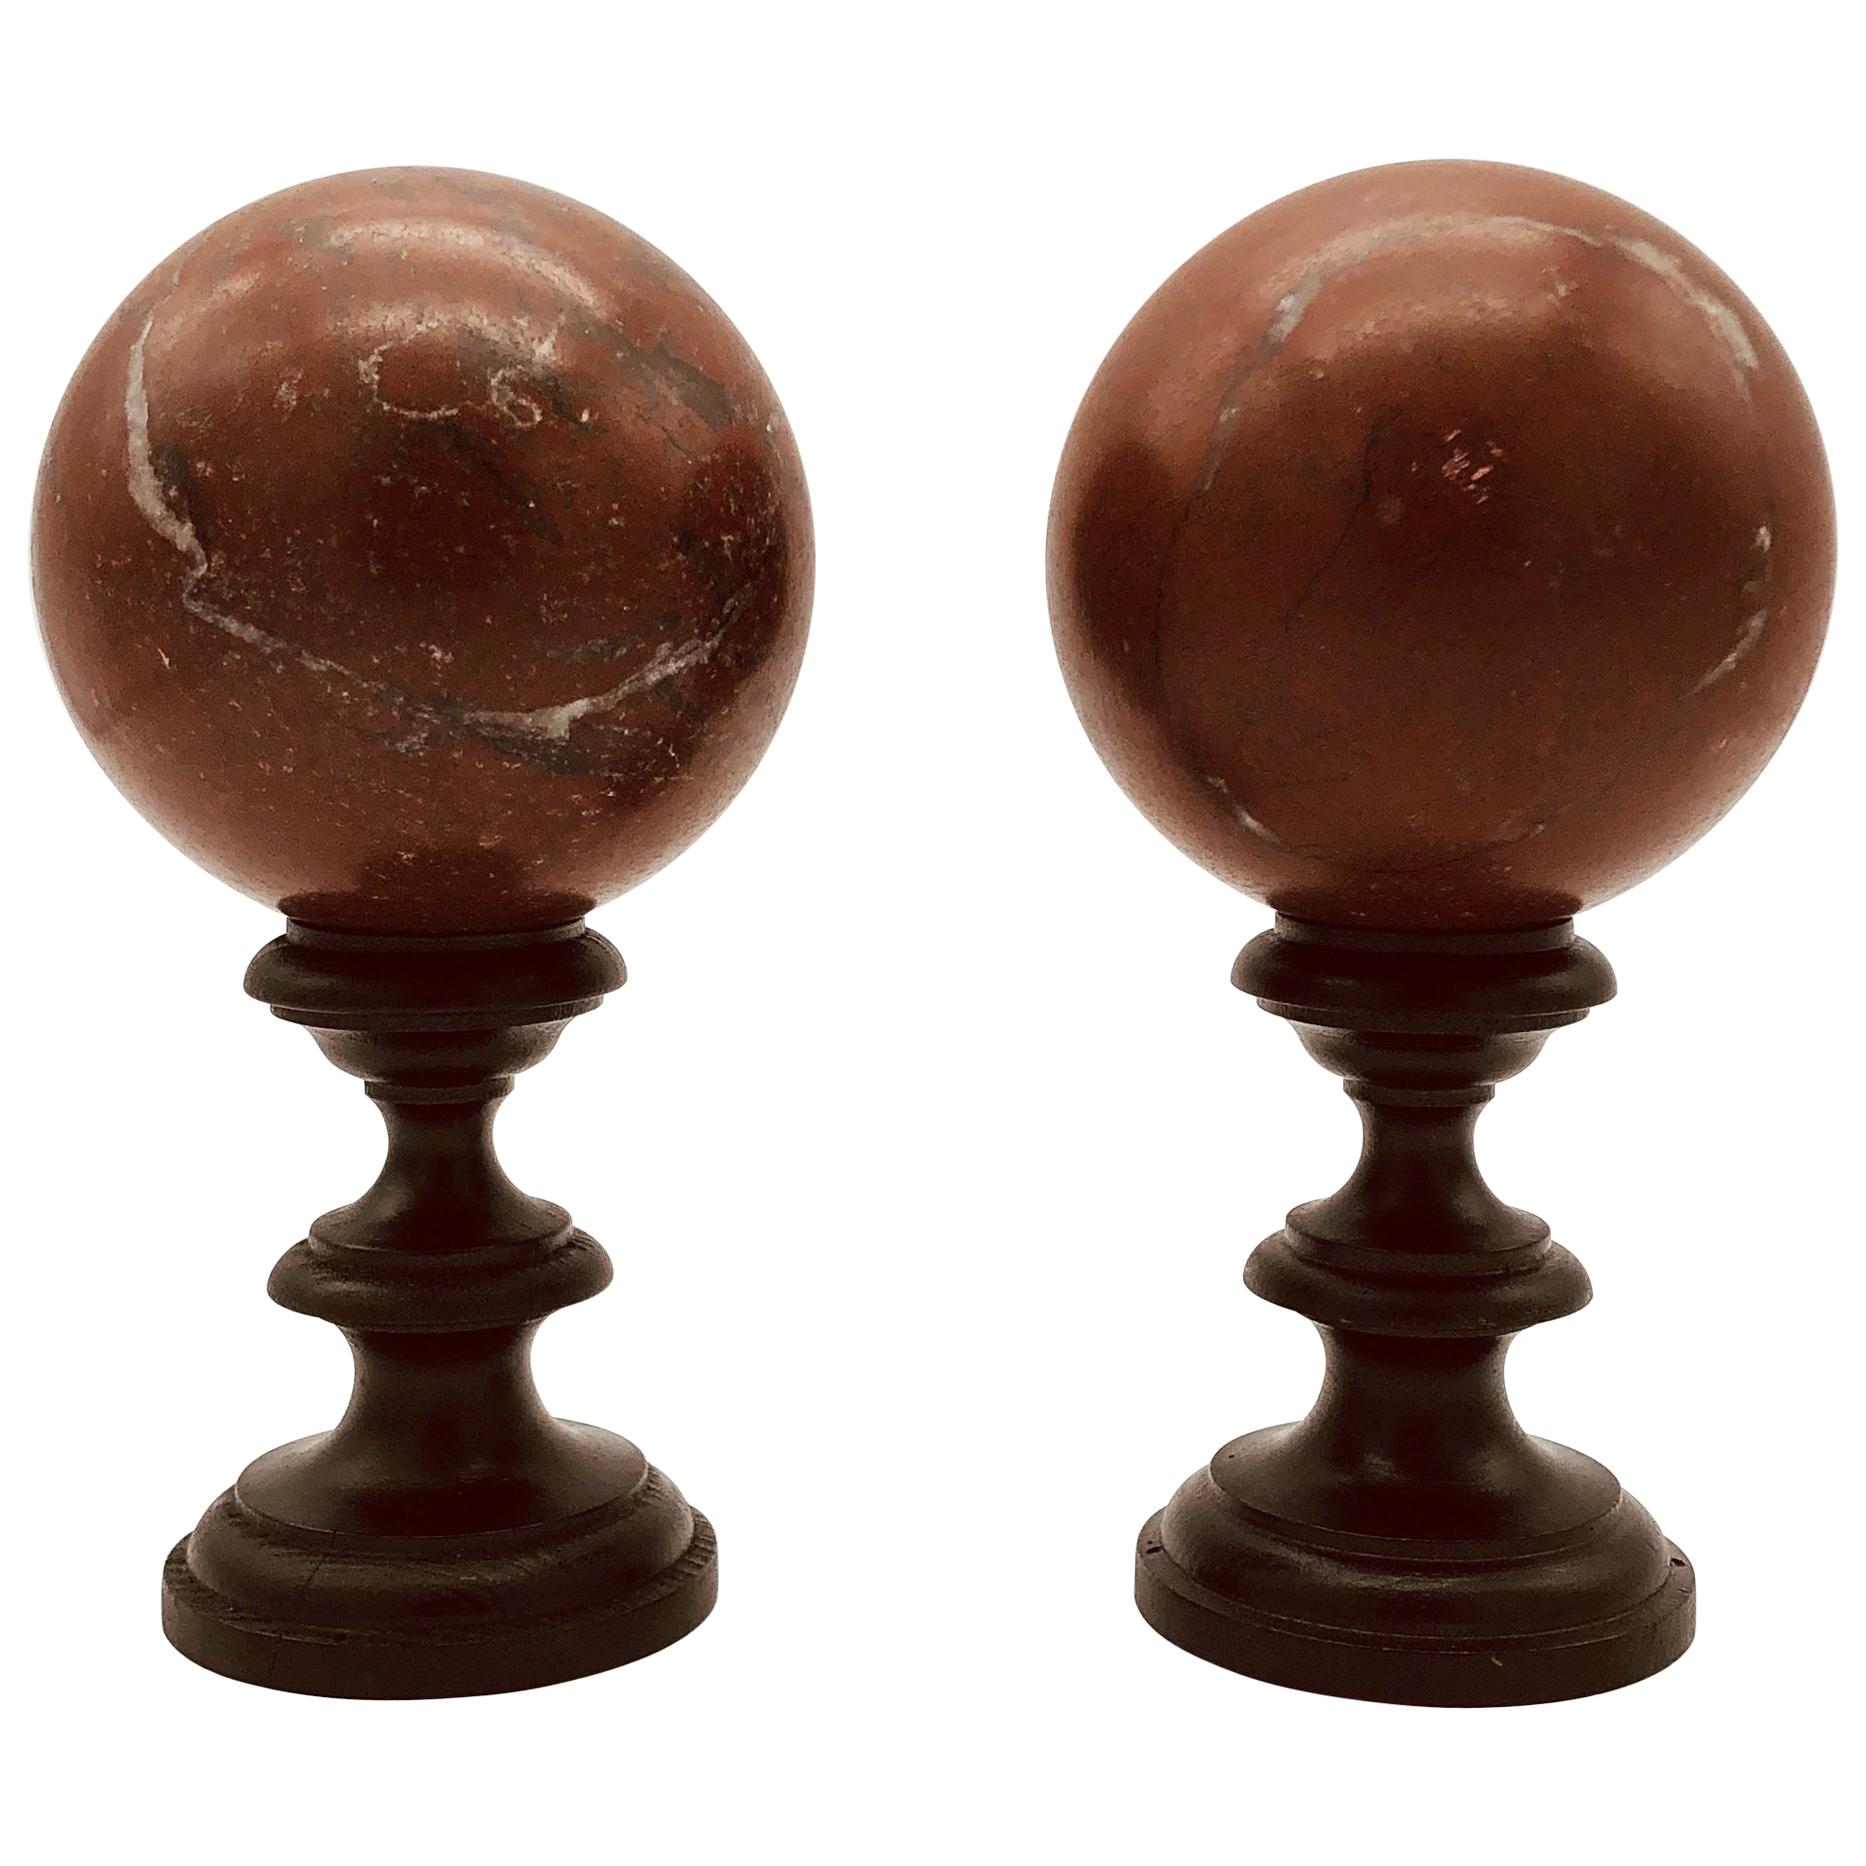 20th Century Italian Pair of Red Griotte Marble Sculpture Grand Tour Balls